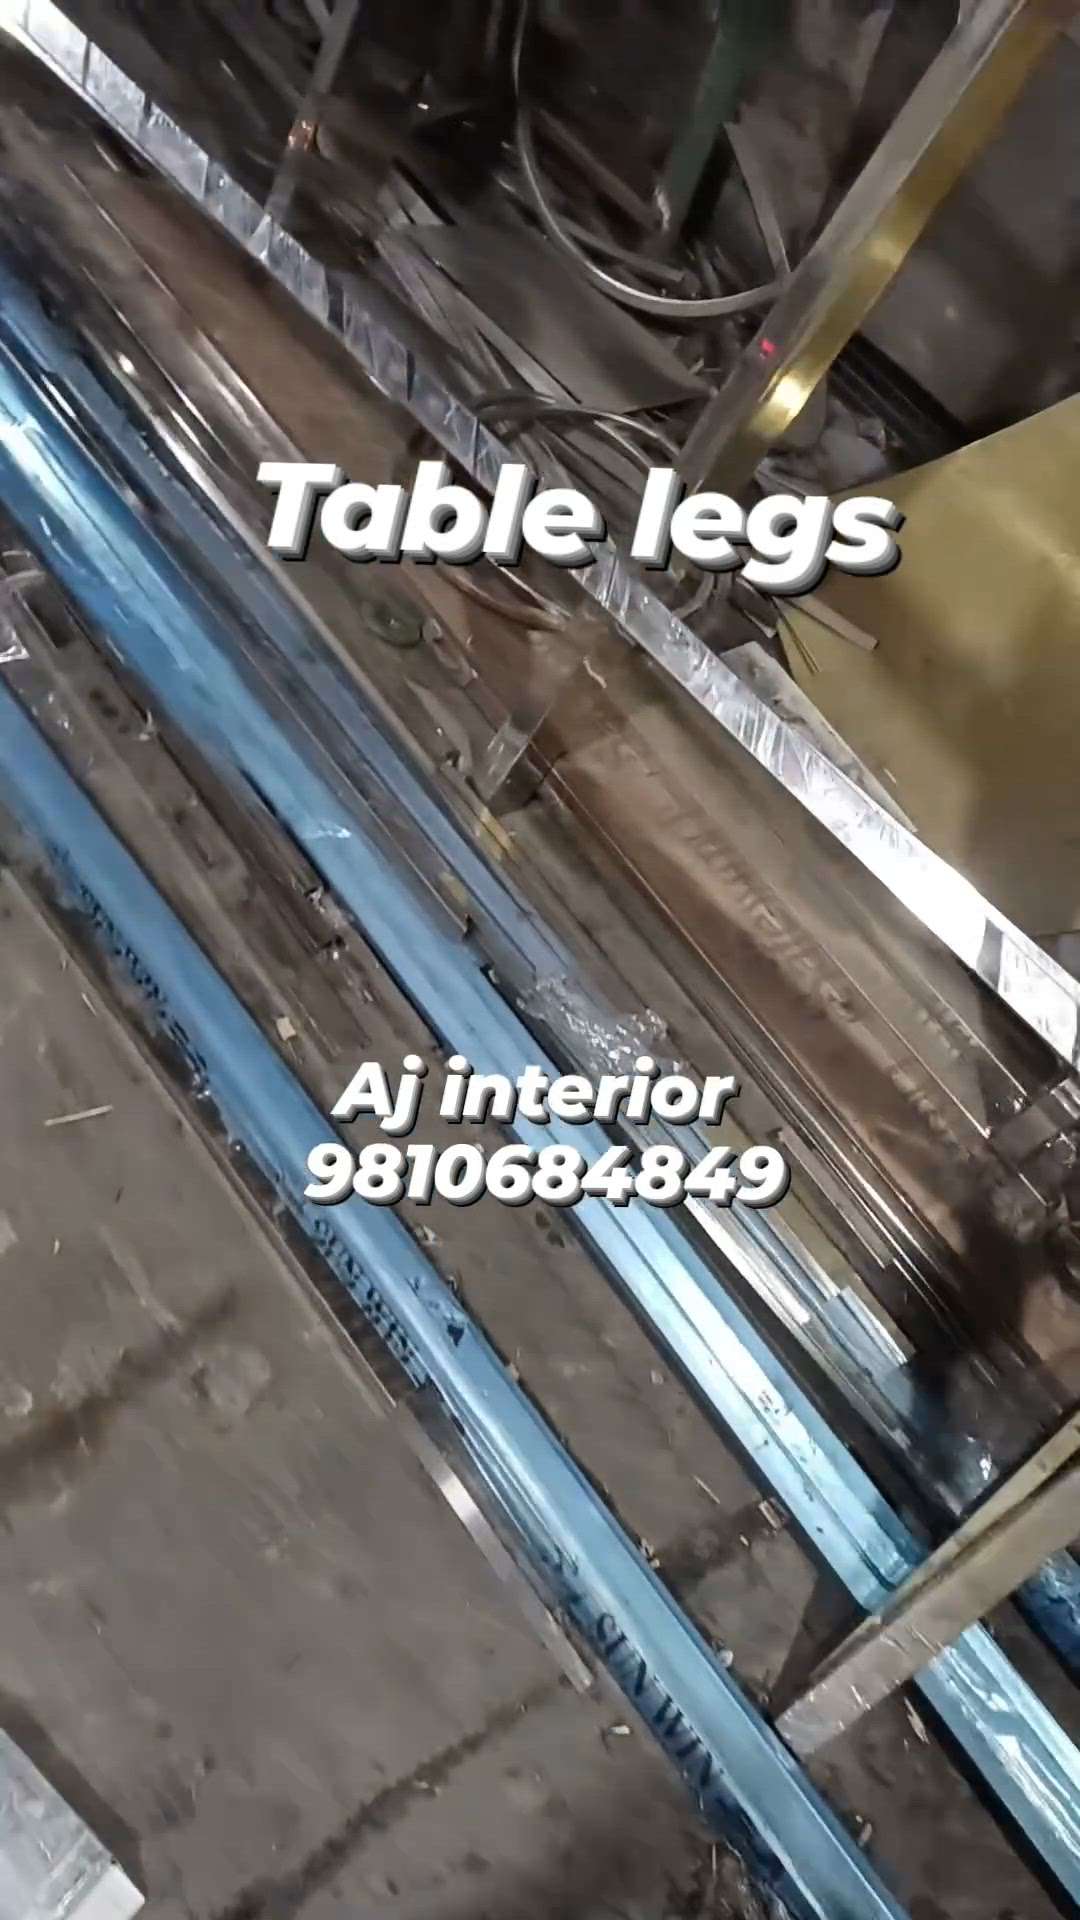 table legs 304 stainless steel with pvd coating